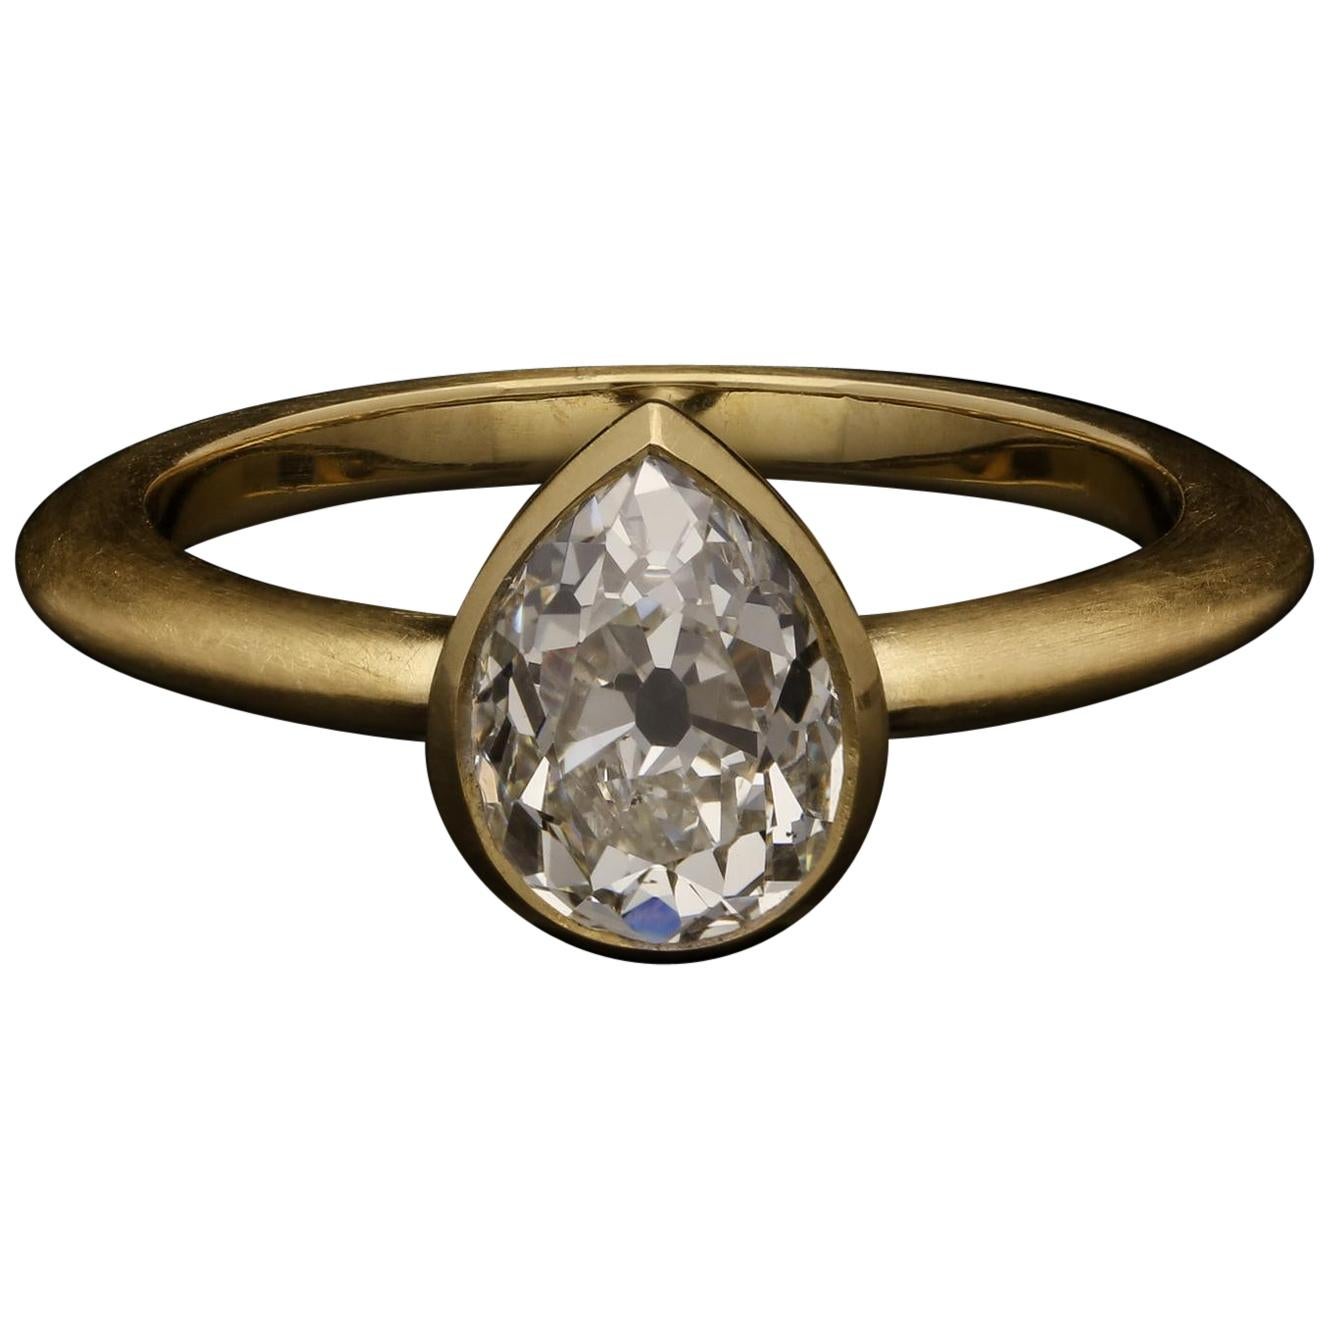 Hancocks 1.48 Carat Old Cut Pear Shape Diamond Solitaire Ring in Satin 18ct Gold